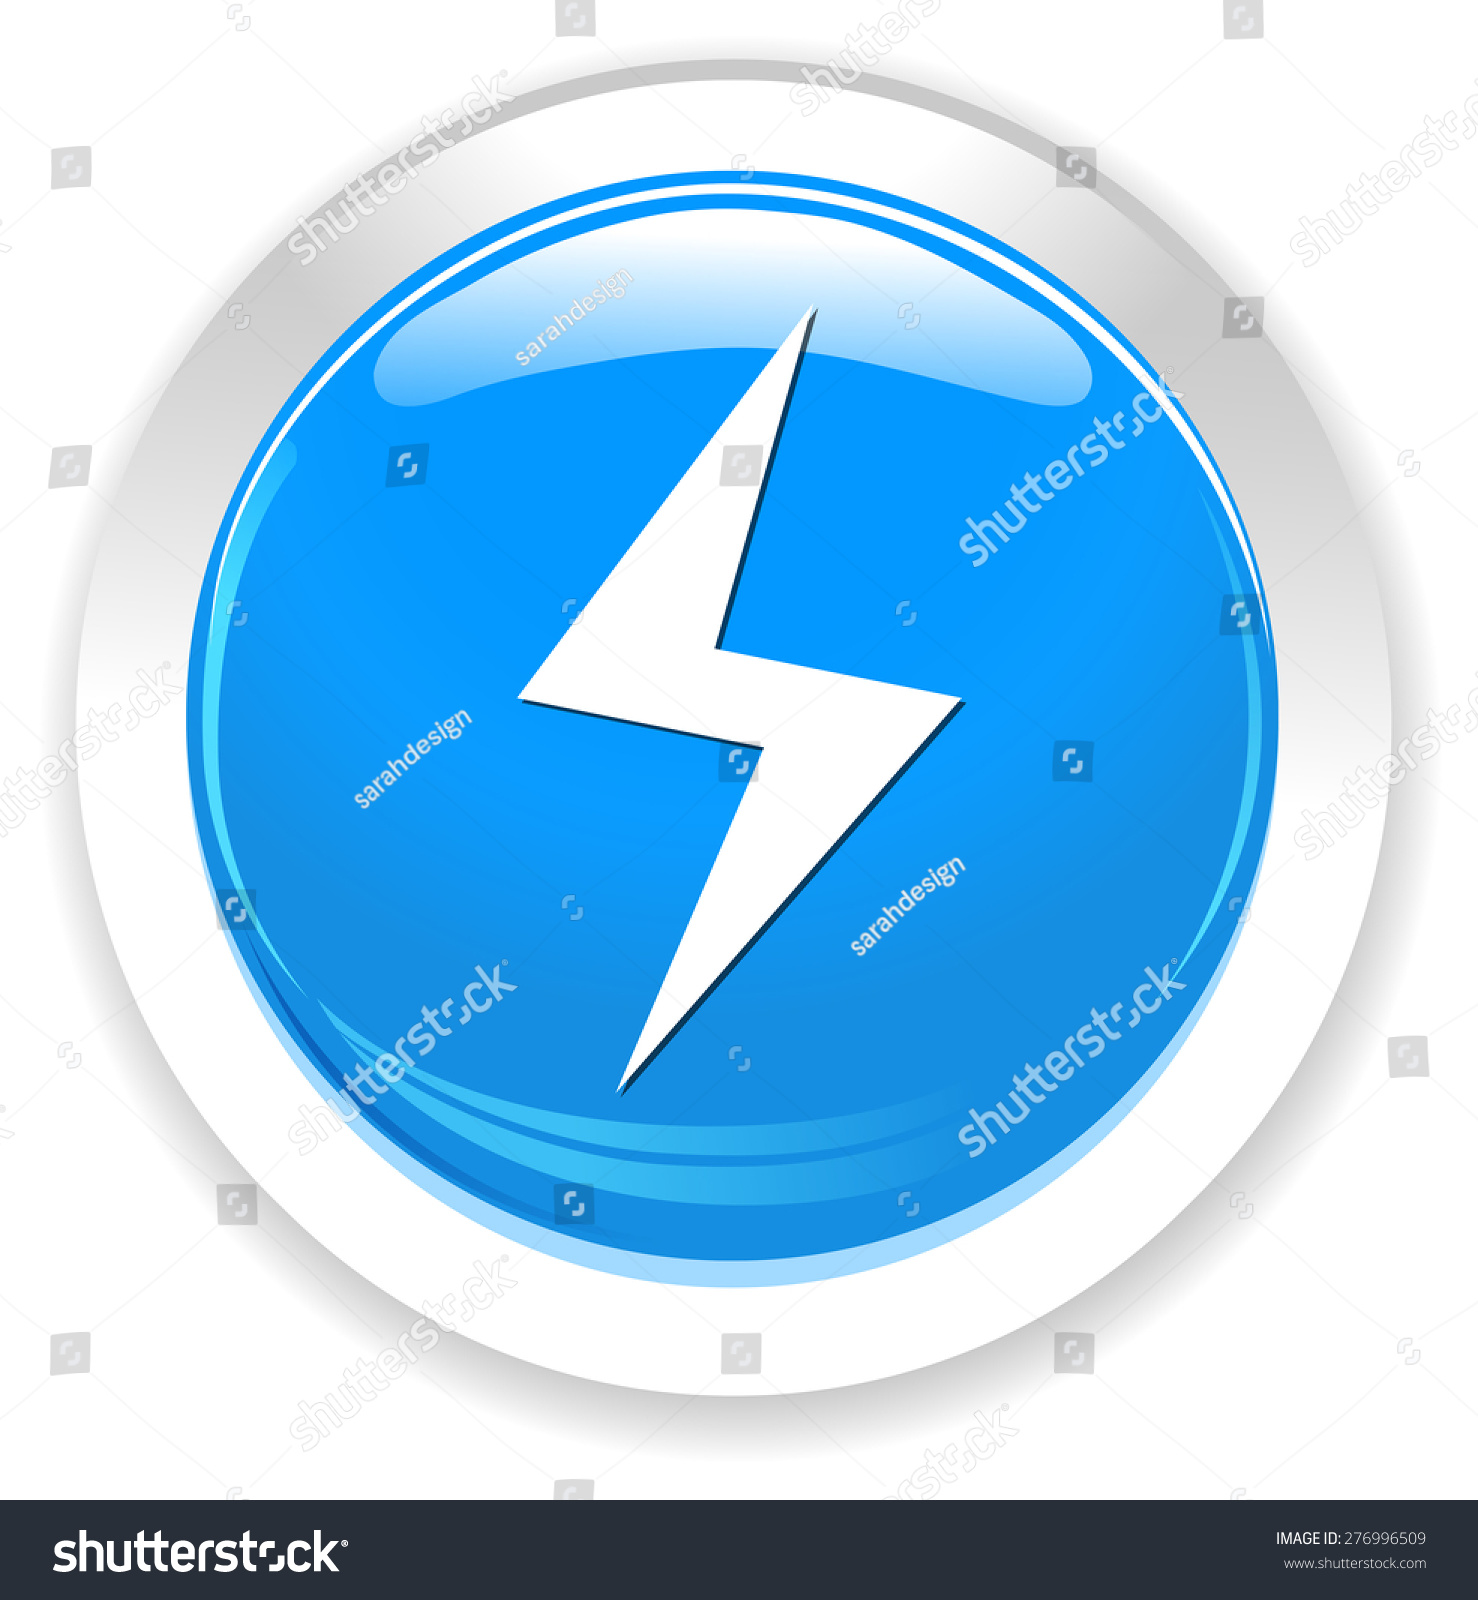 power icon Royalty Free Stock Vector 276996509